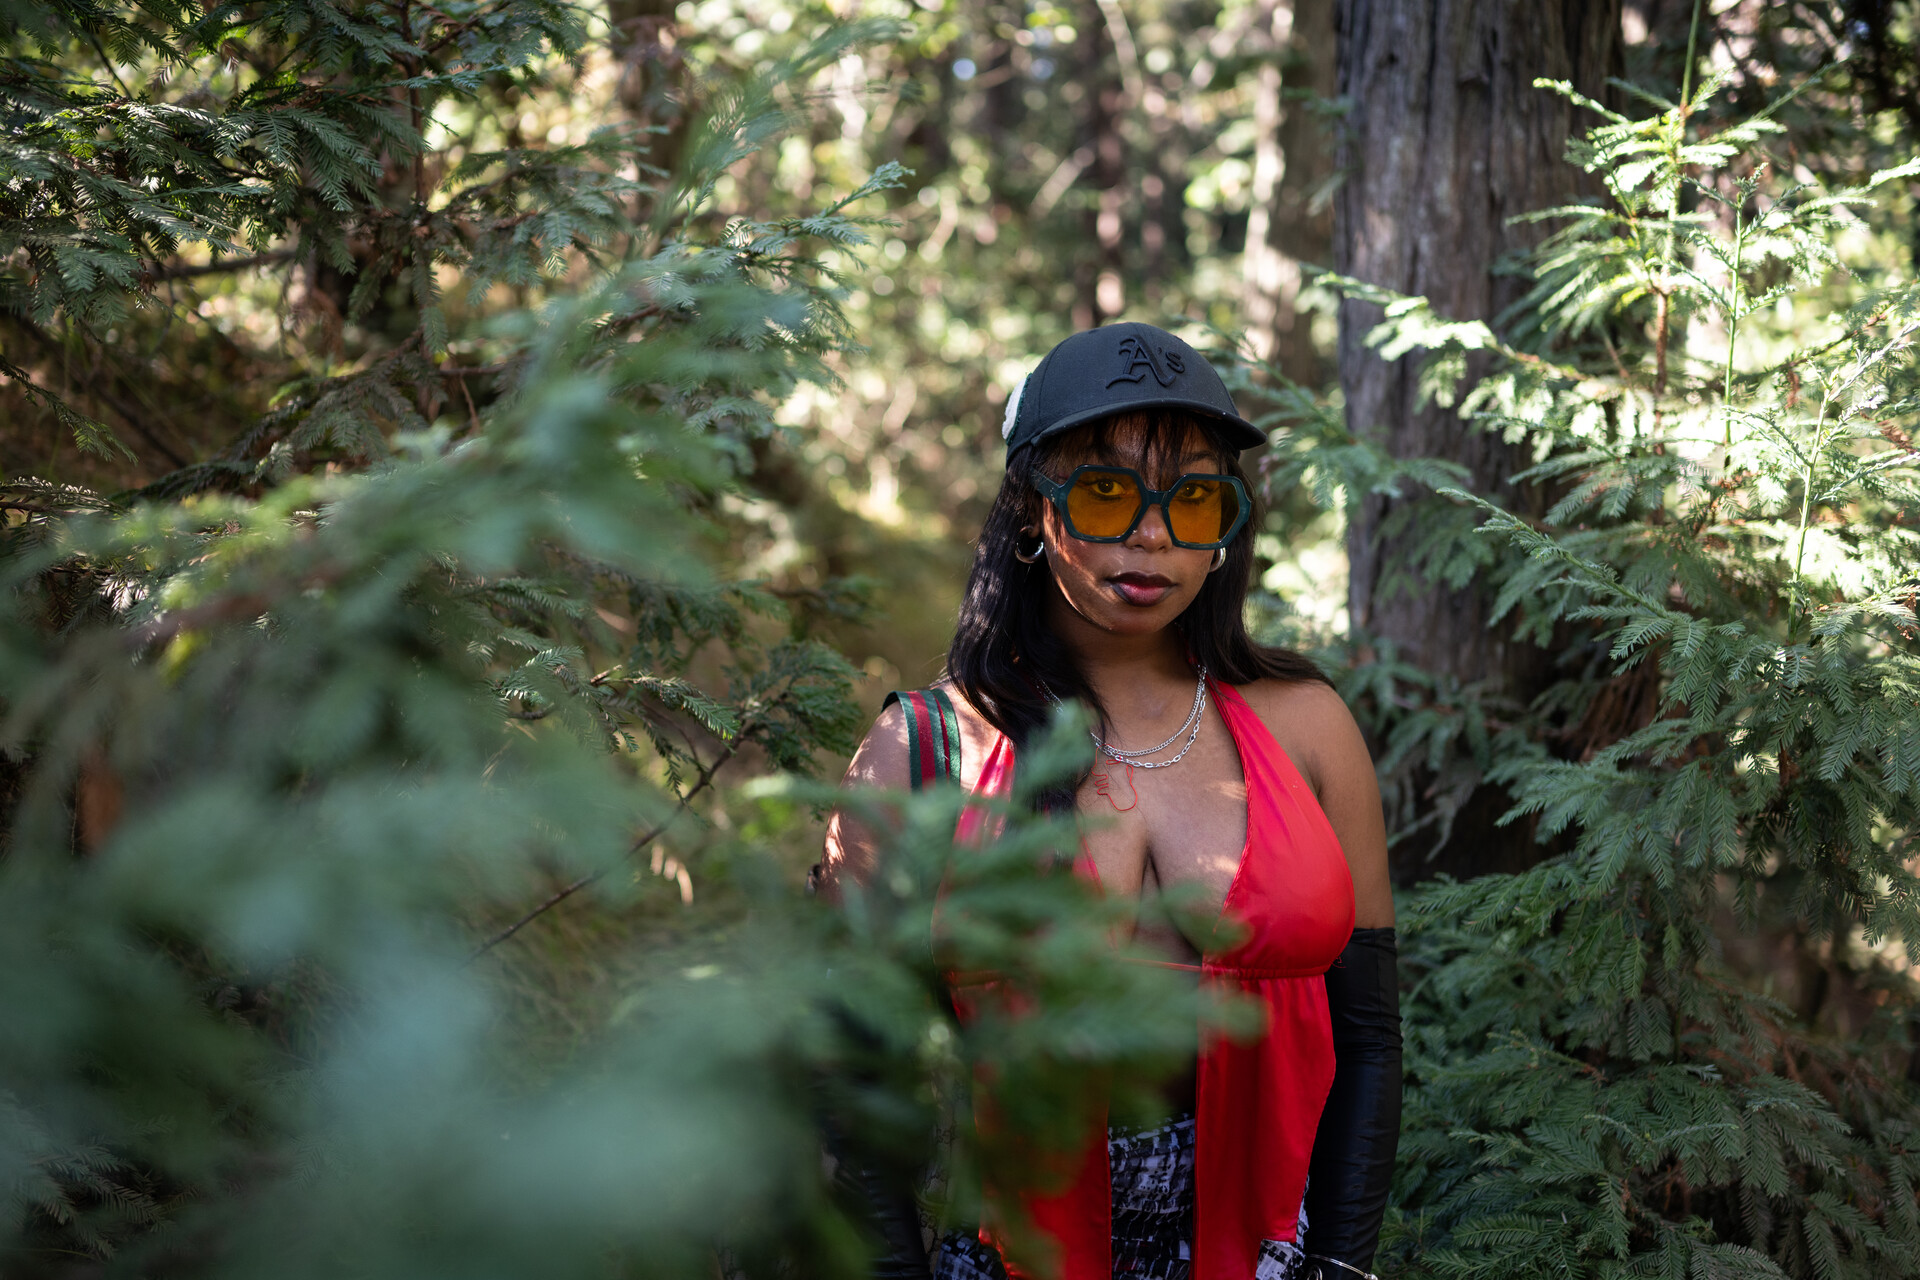 Black woman in black A's cap and red top stands among trees